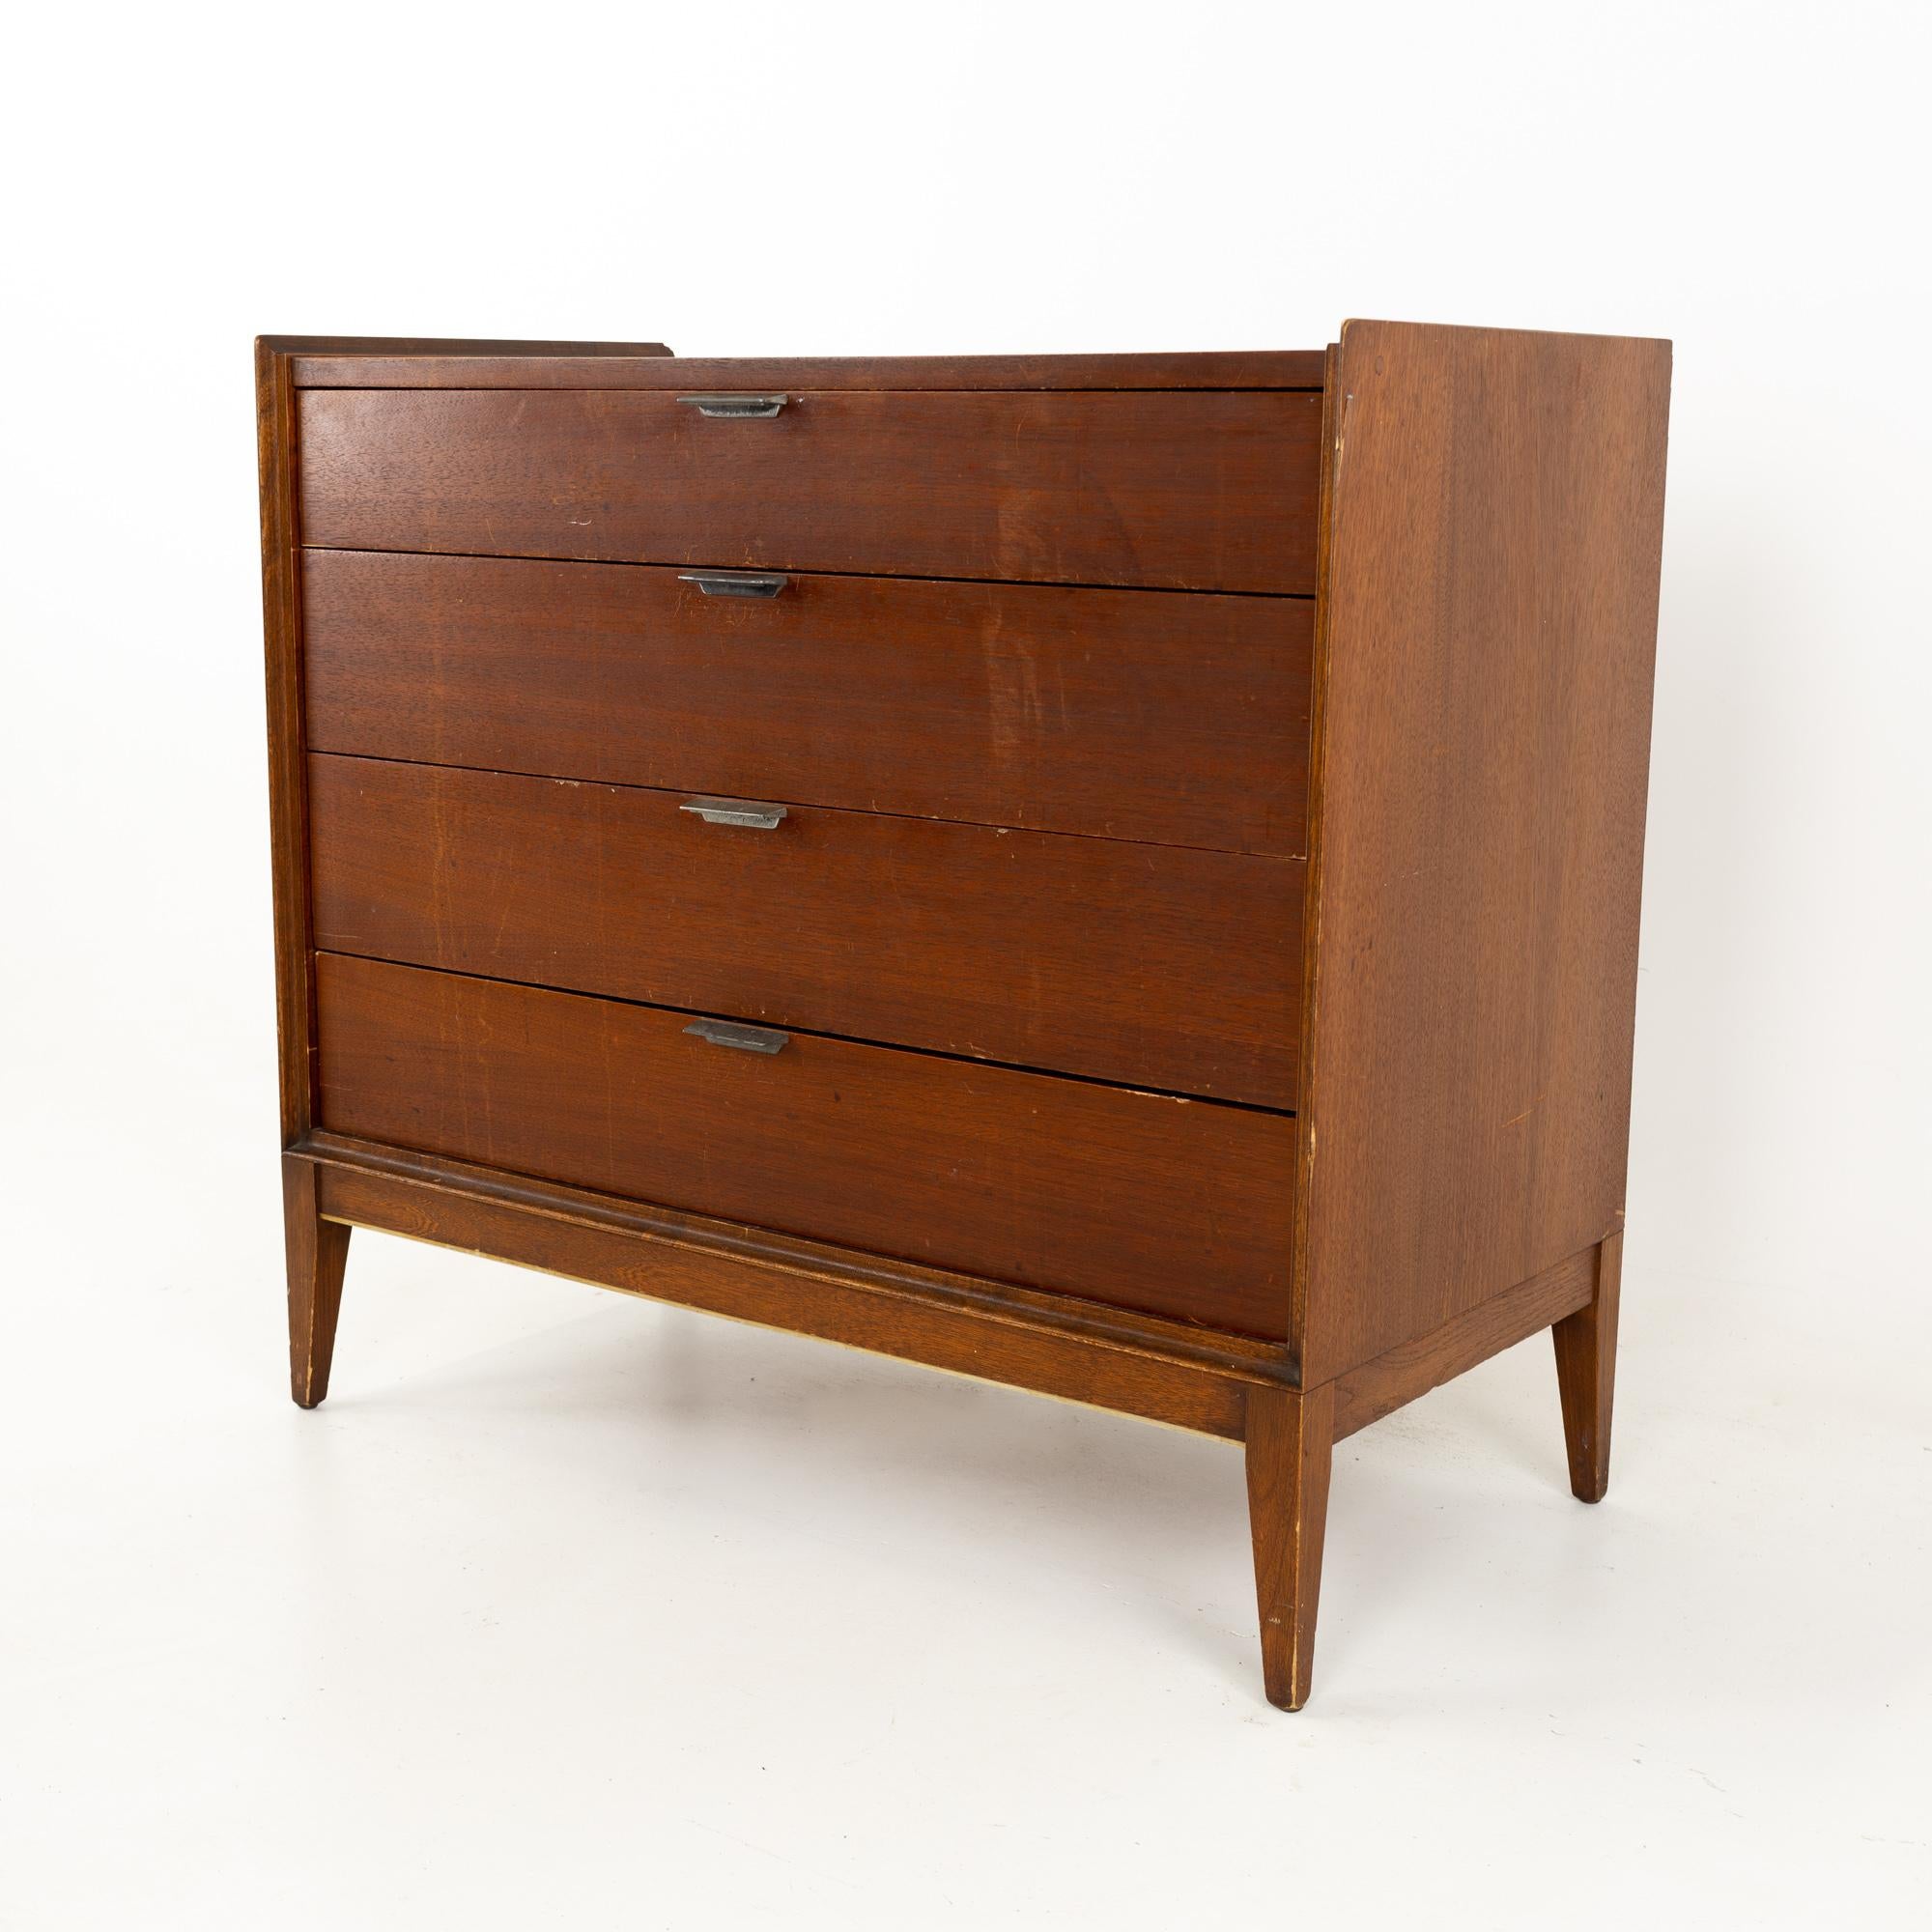 Arthur Umanoff for Cavalier Furniture mid century 4 drawer dresser.
This dresser is 35.75 wide x 18 deep x 32.5 inches high

All pieces of furniture can be had in what we call restored vintage condition. That means the piece is restored upon